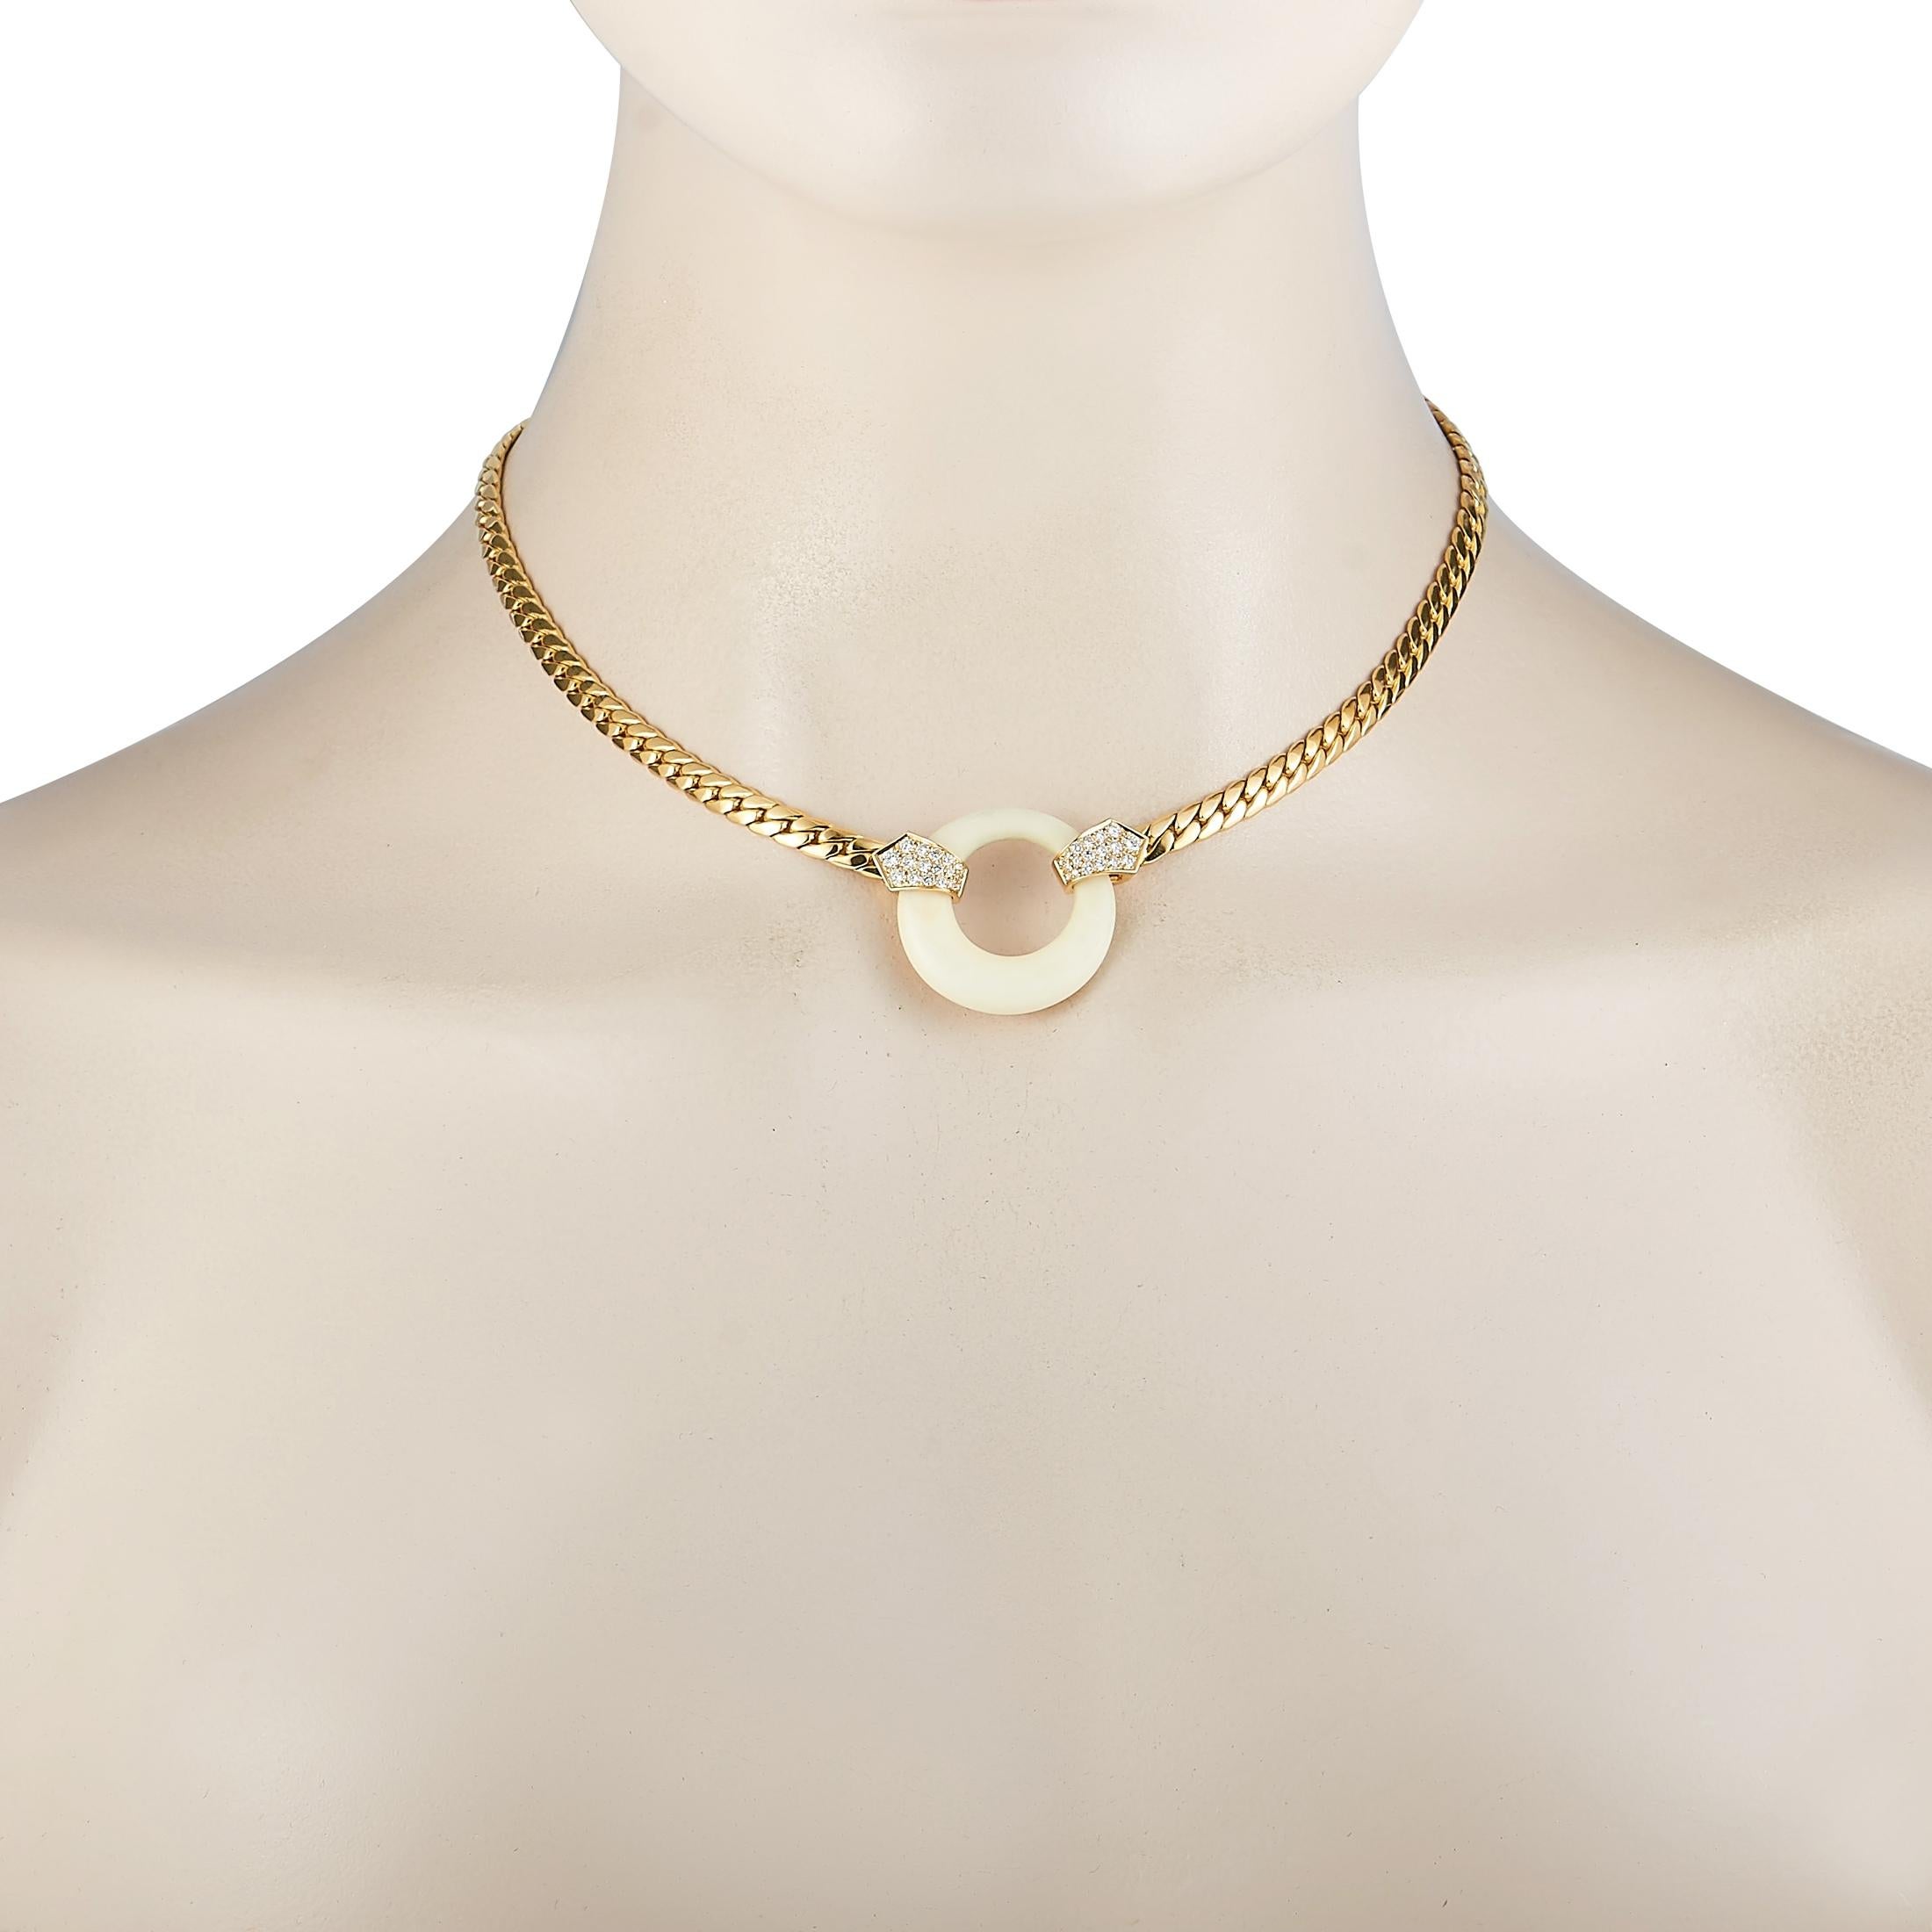 This vintage Van Cleef & Arpels necklace is crafted from 18K yellow gold and weighs 45.7 grams. It is presented with a 14” chain and a white coral pendant that measures 1.14” in length and 1.10” in width. The necklace is embellished with diamonds